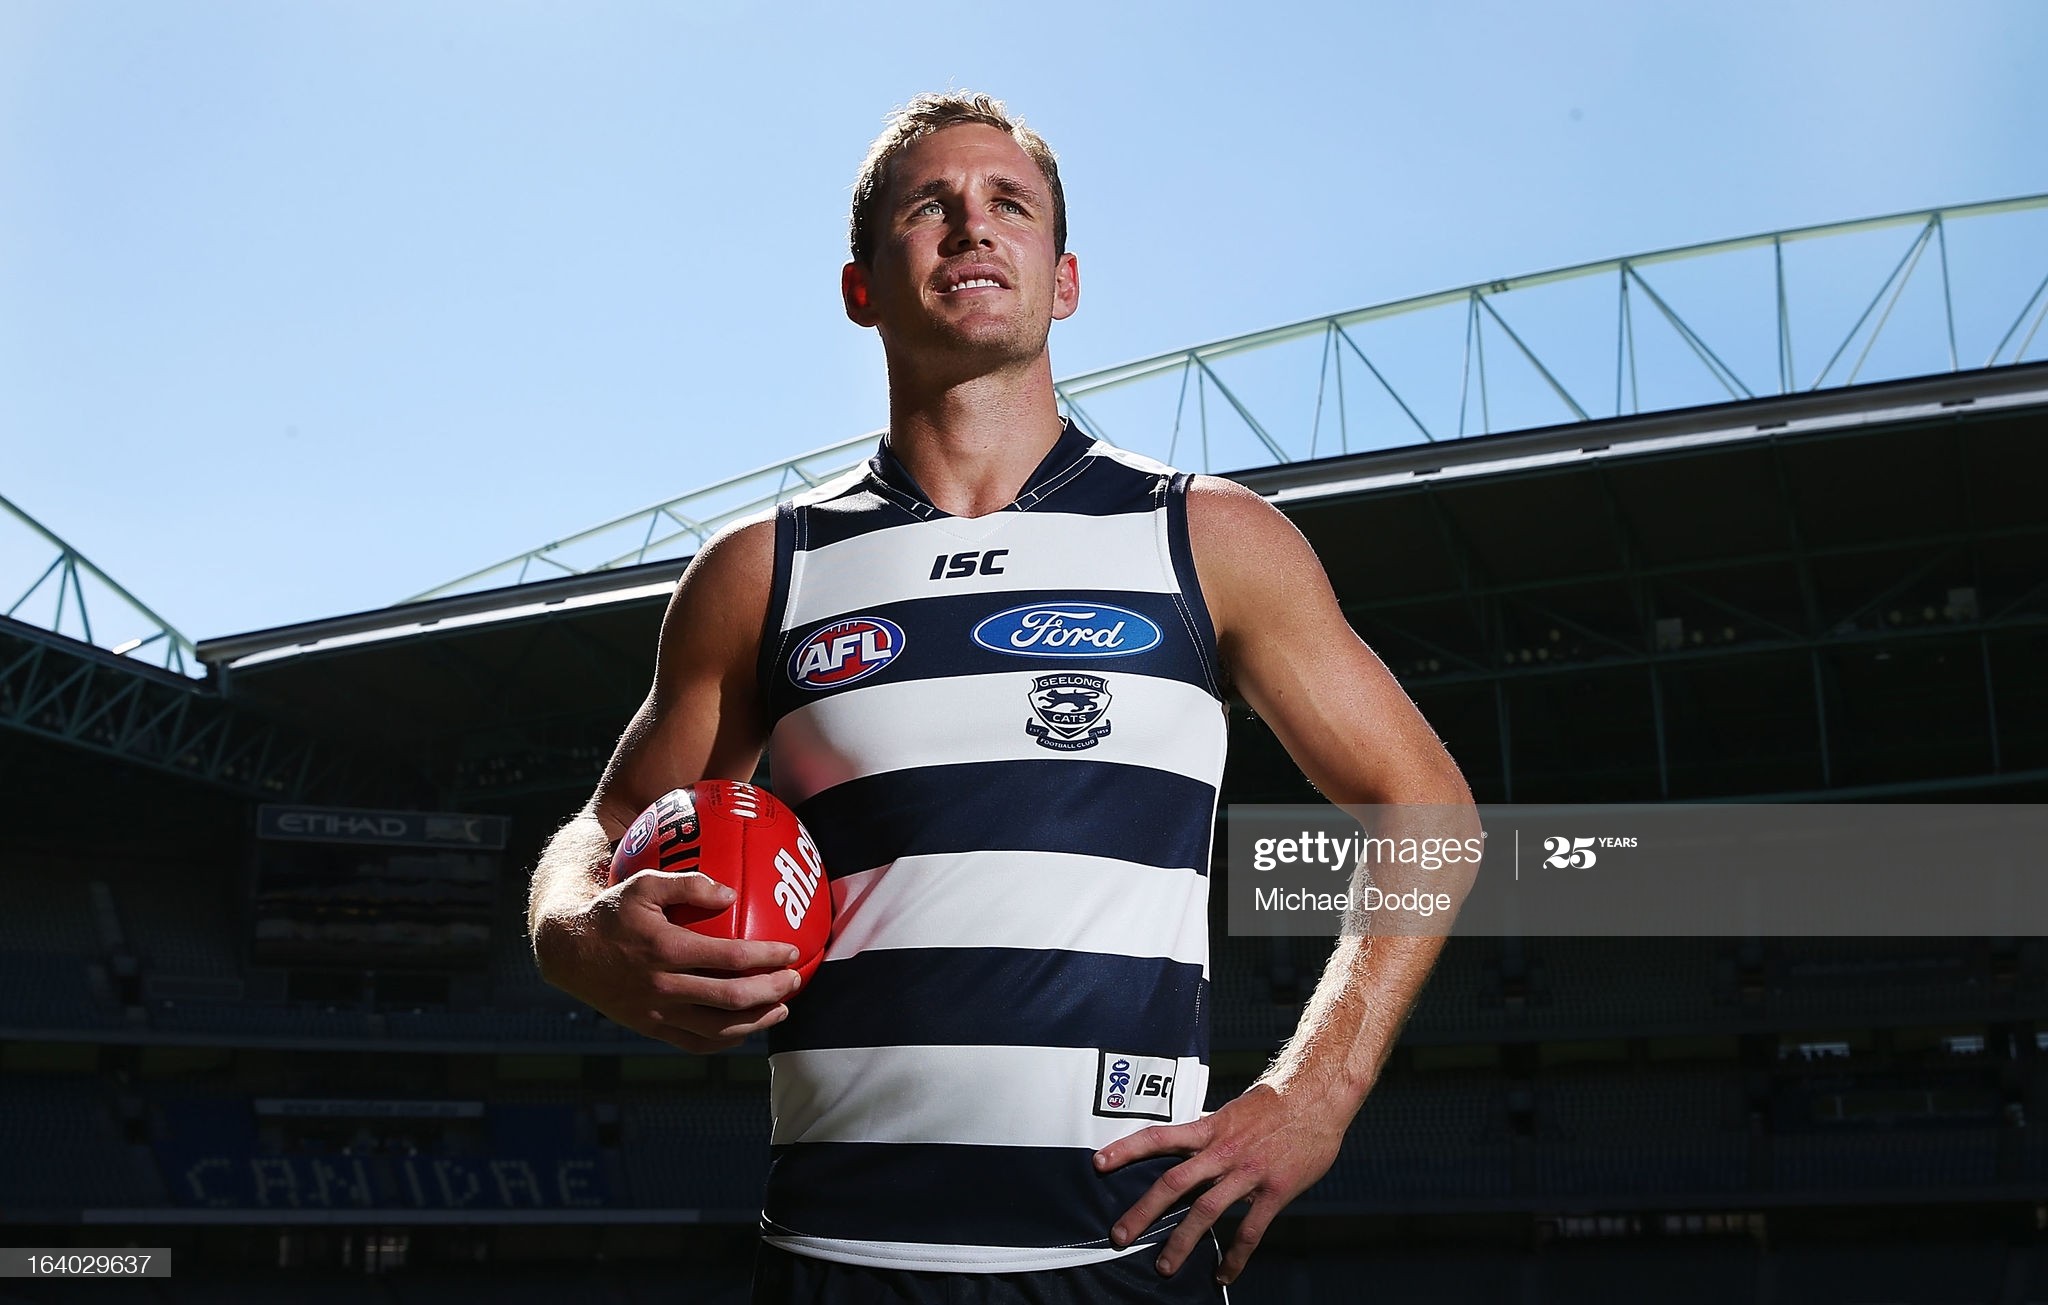 geelong-cats-captain-joel-selwood-poses-during-the-afl-captains-media-picture-id164029637